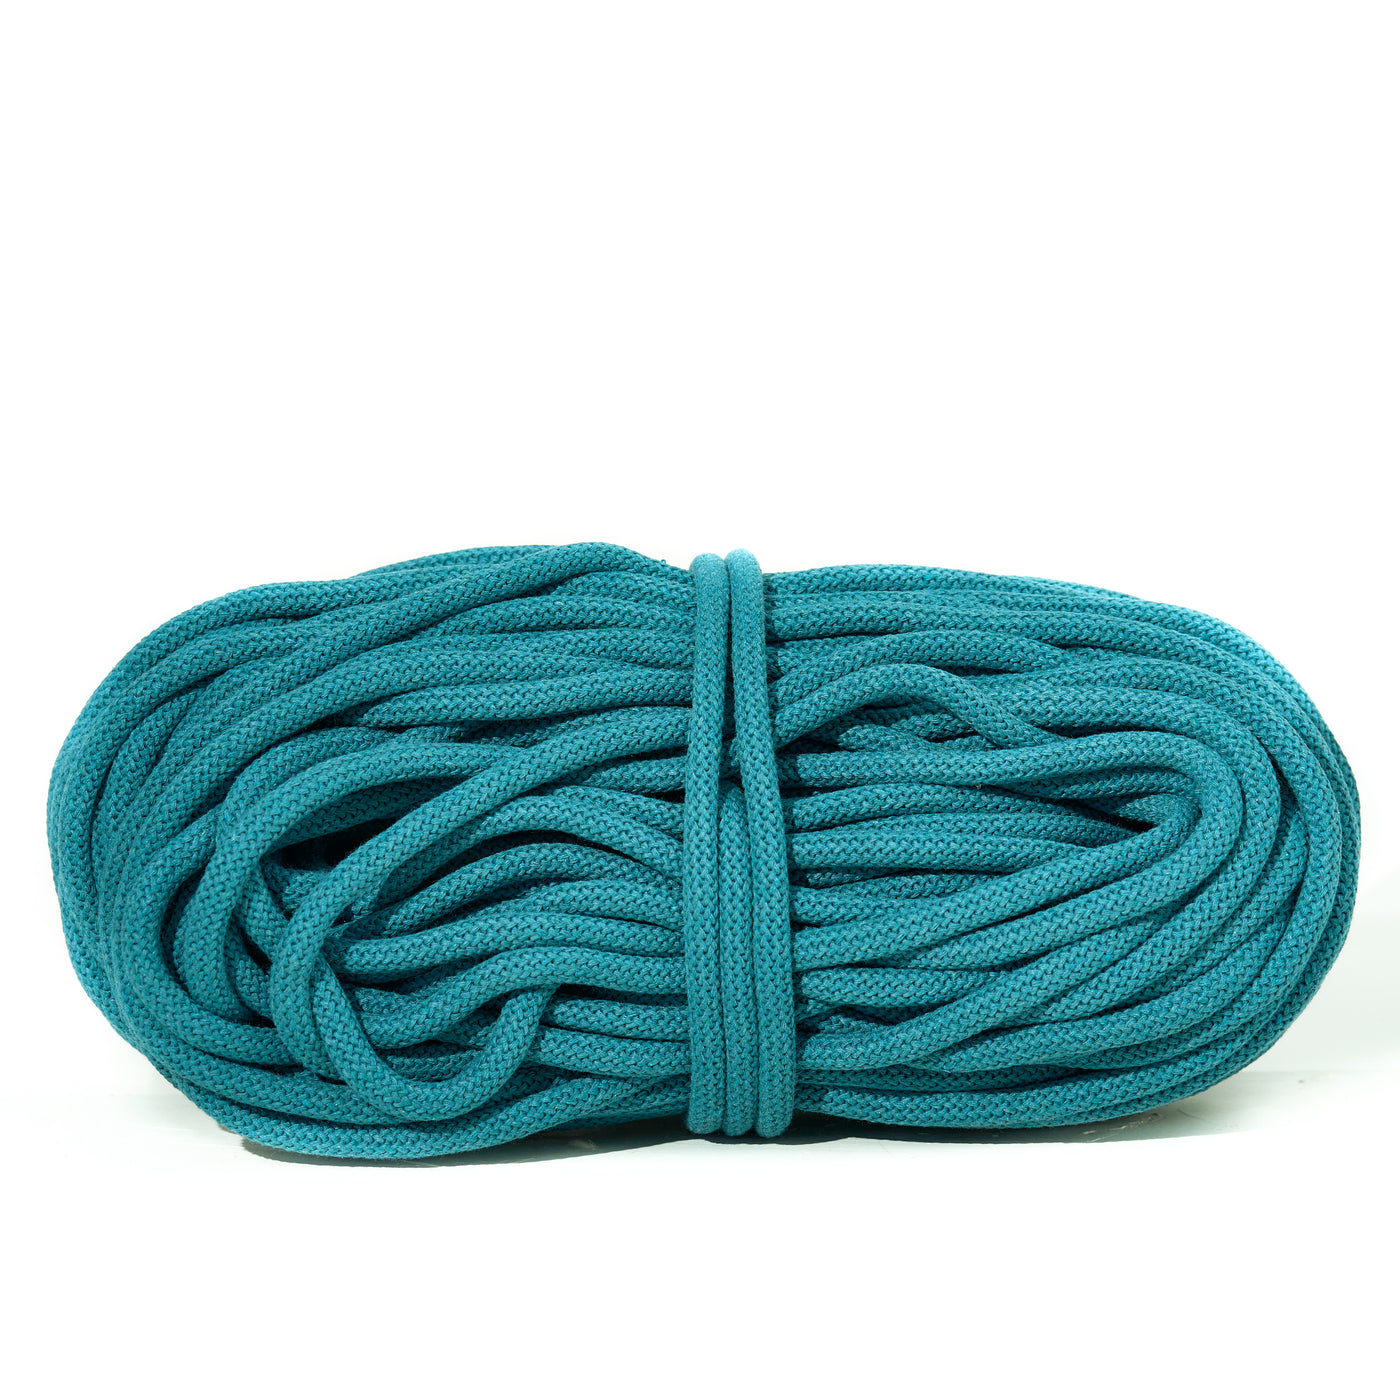 Braided Recycled Cotton Cord 9mm - Ocean Teal